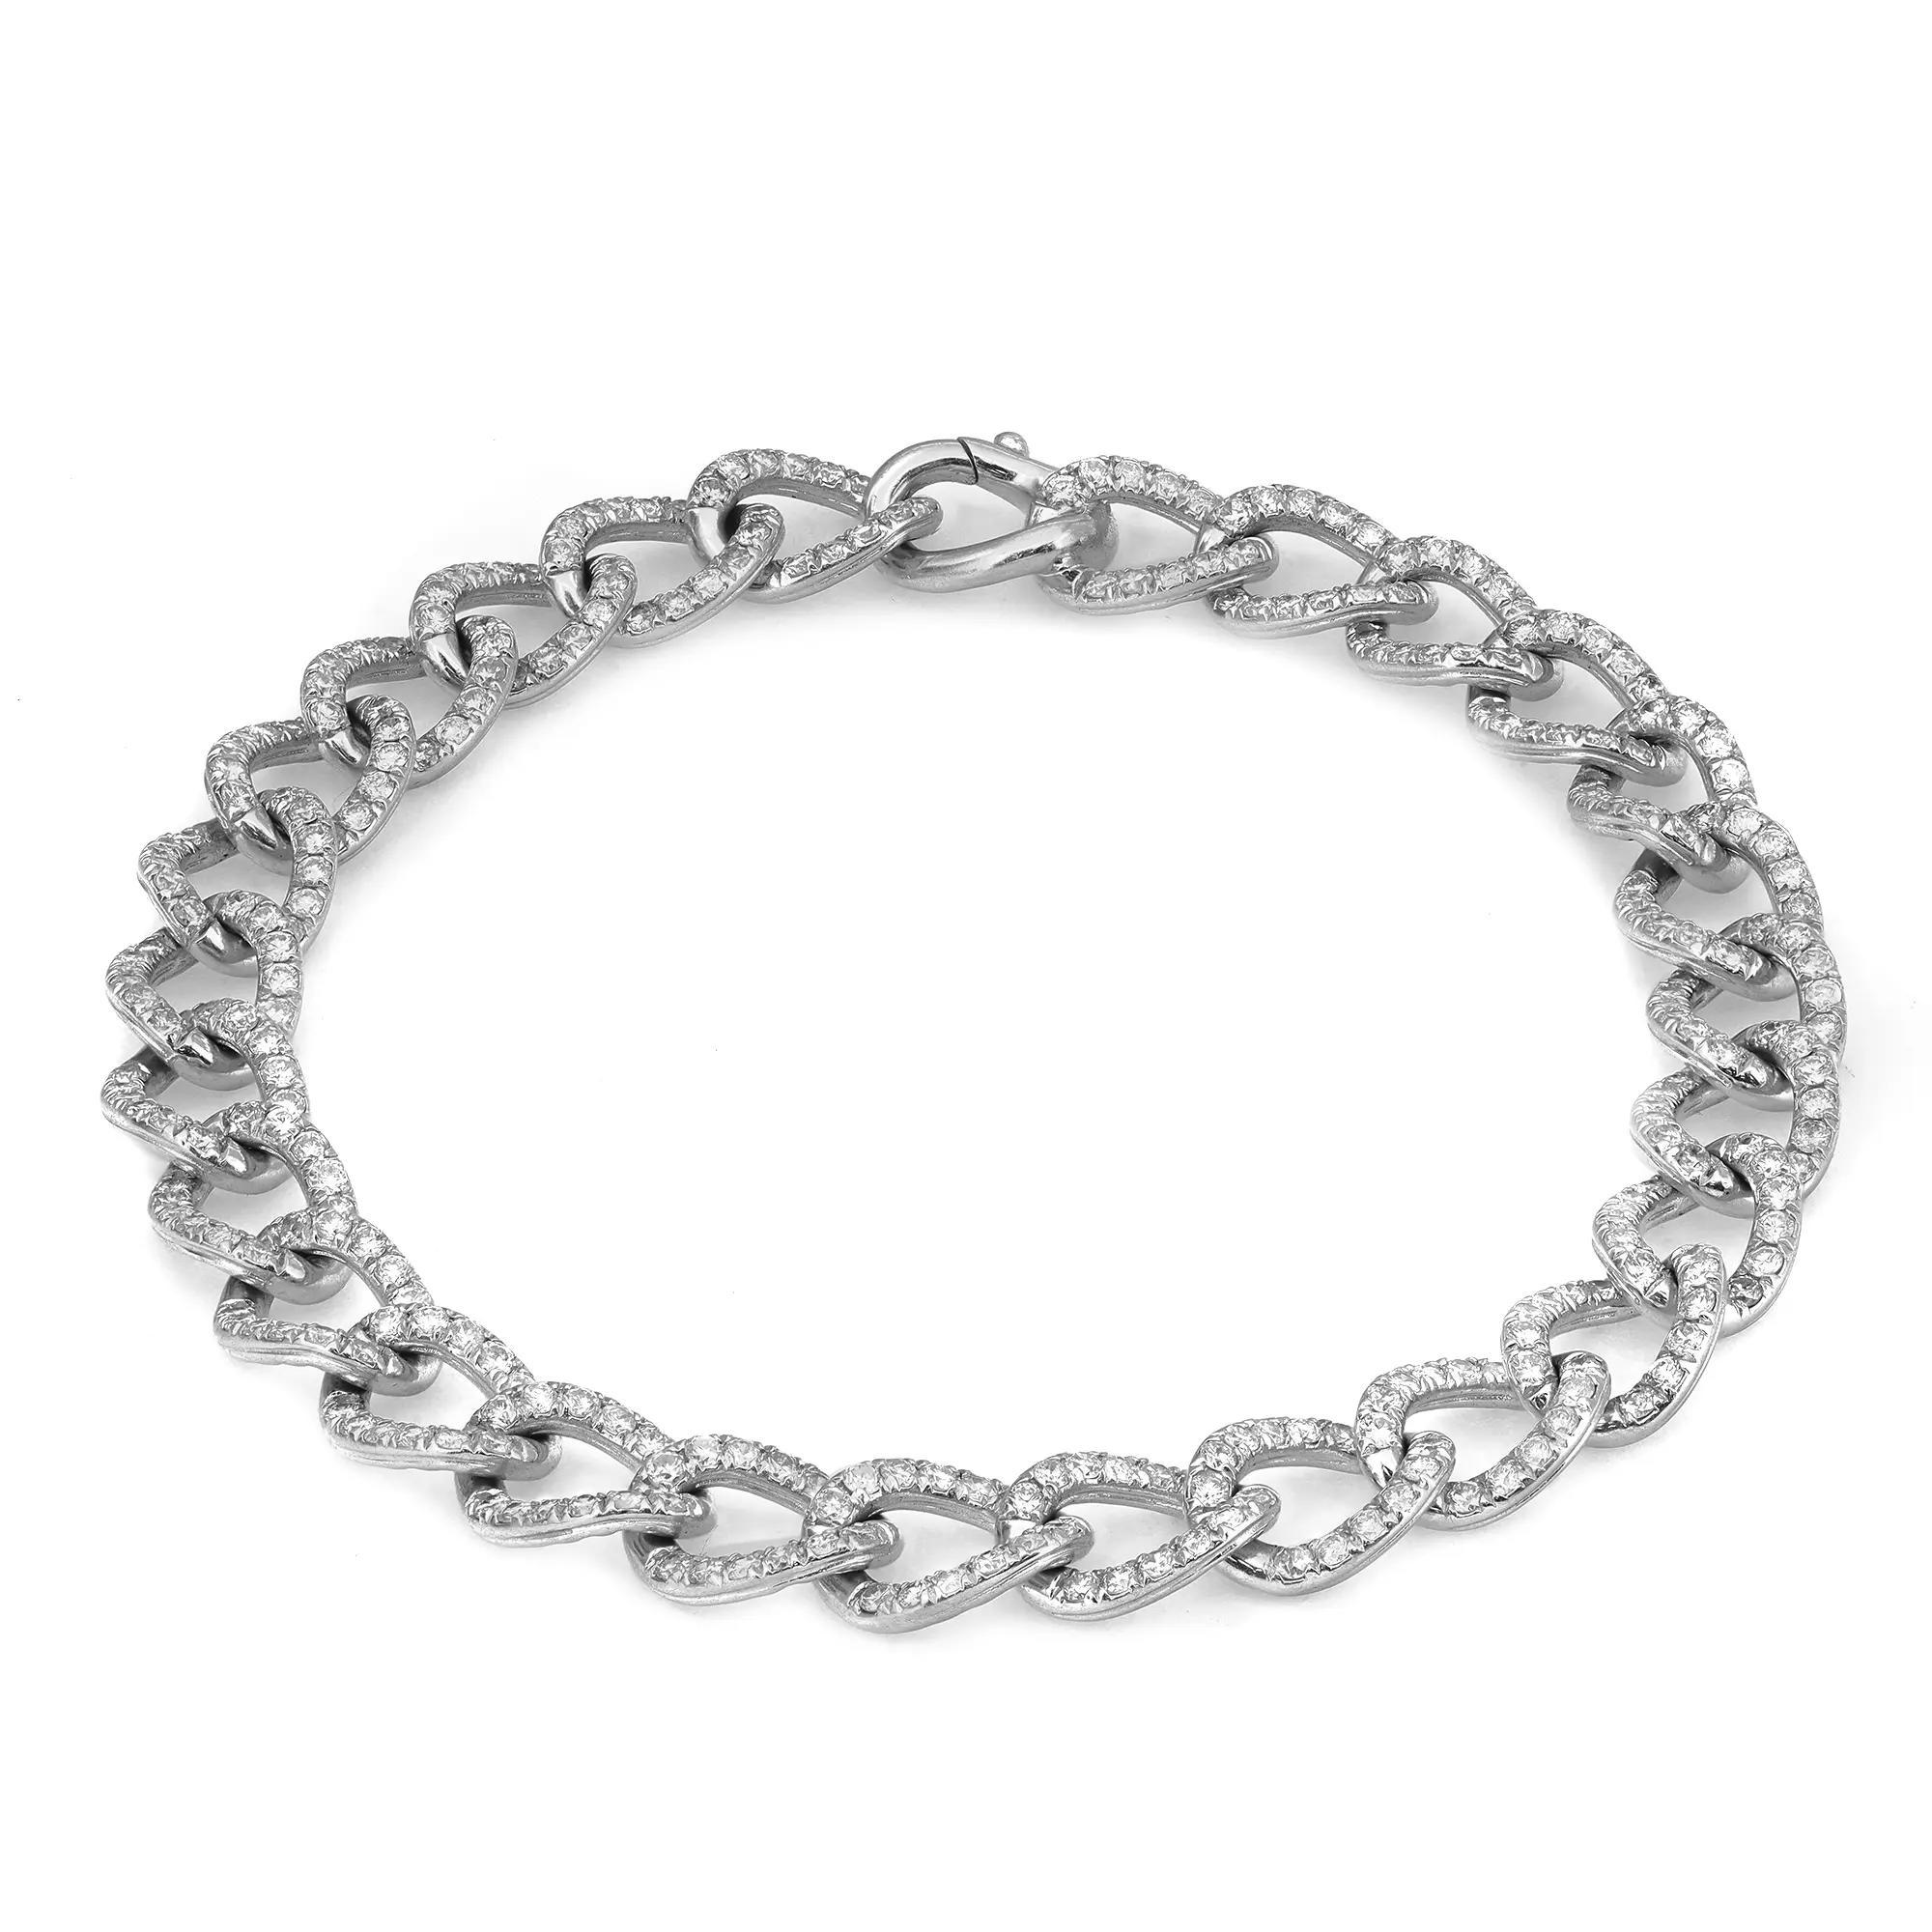 Adorn a beautiful blend of style and simplicity with this Cuban link chain bracelet. Featuring, pave set round brilliant cut diamonds studded in a Cuban link chain bracelet. Total diamond weight: 2.69 carats. Diamond Quality: G-H color and SI